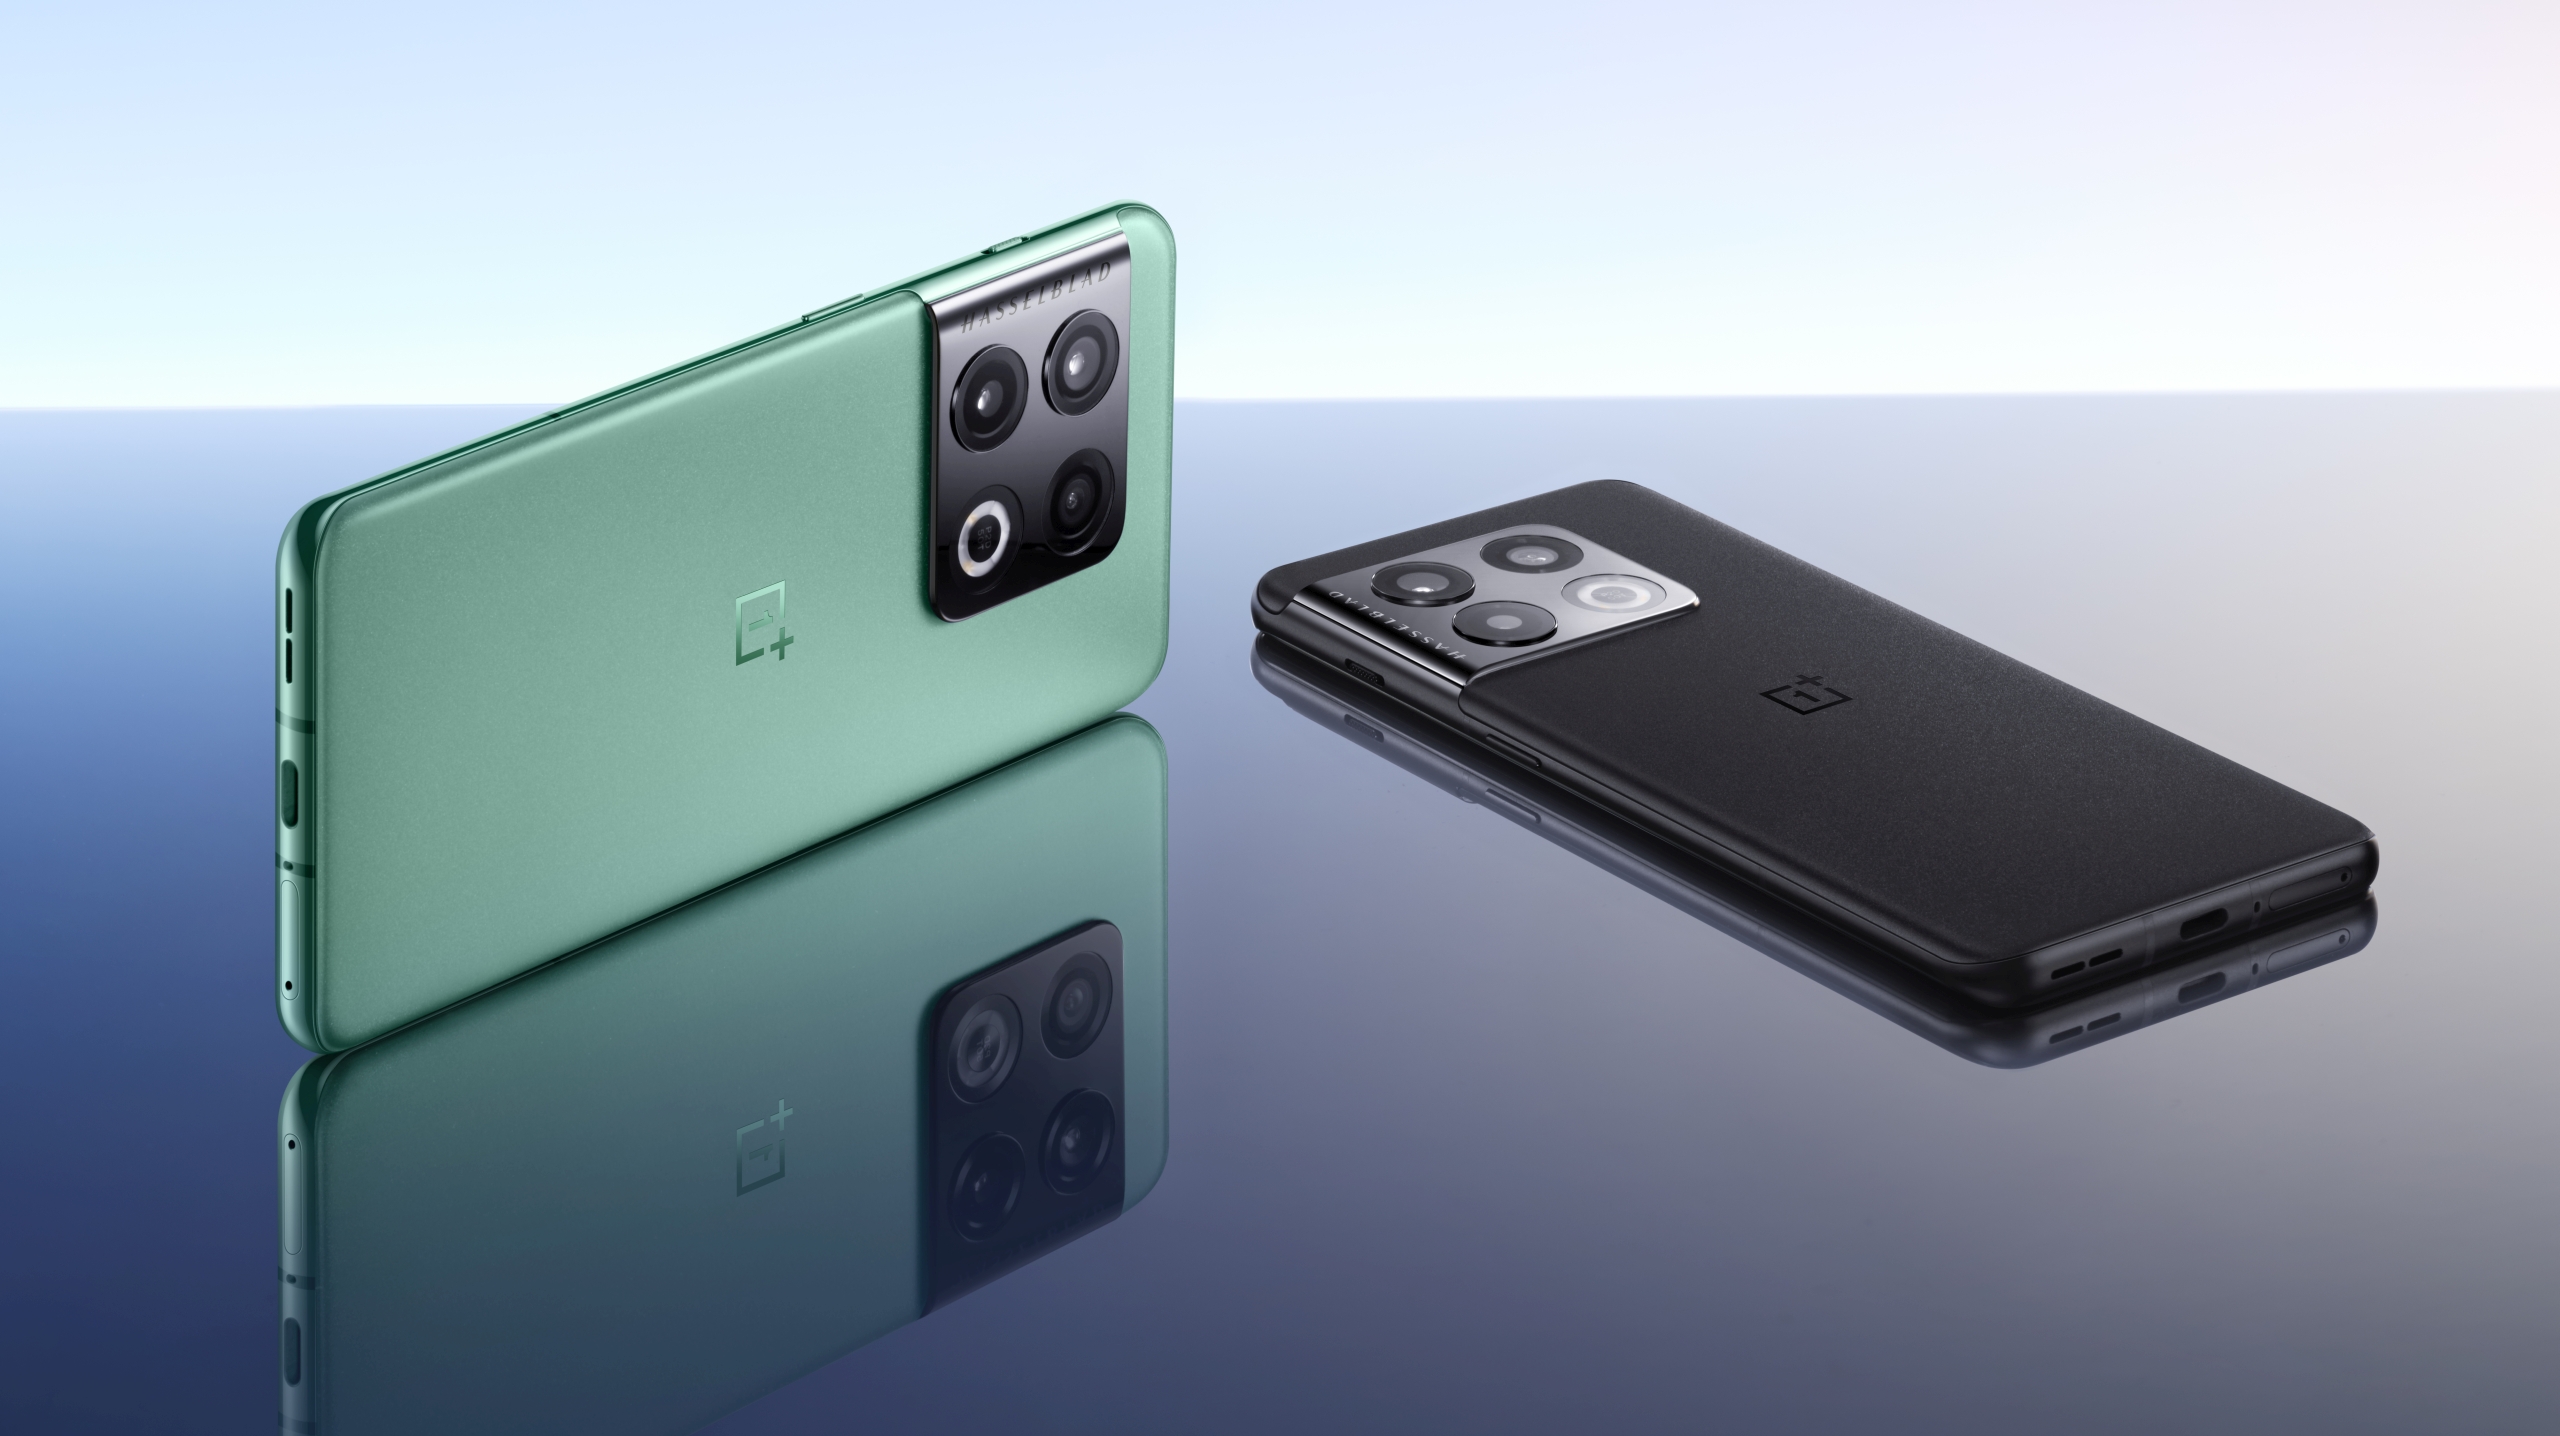 OnePlus 10 Pro appears in black and green